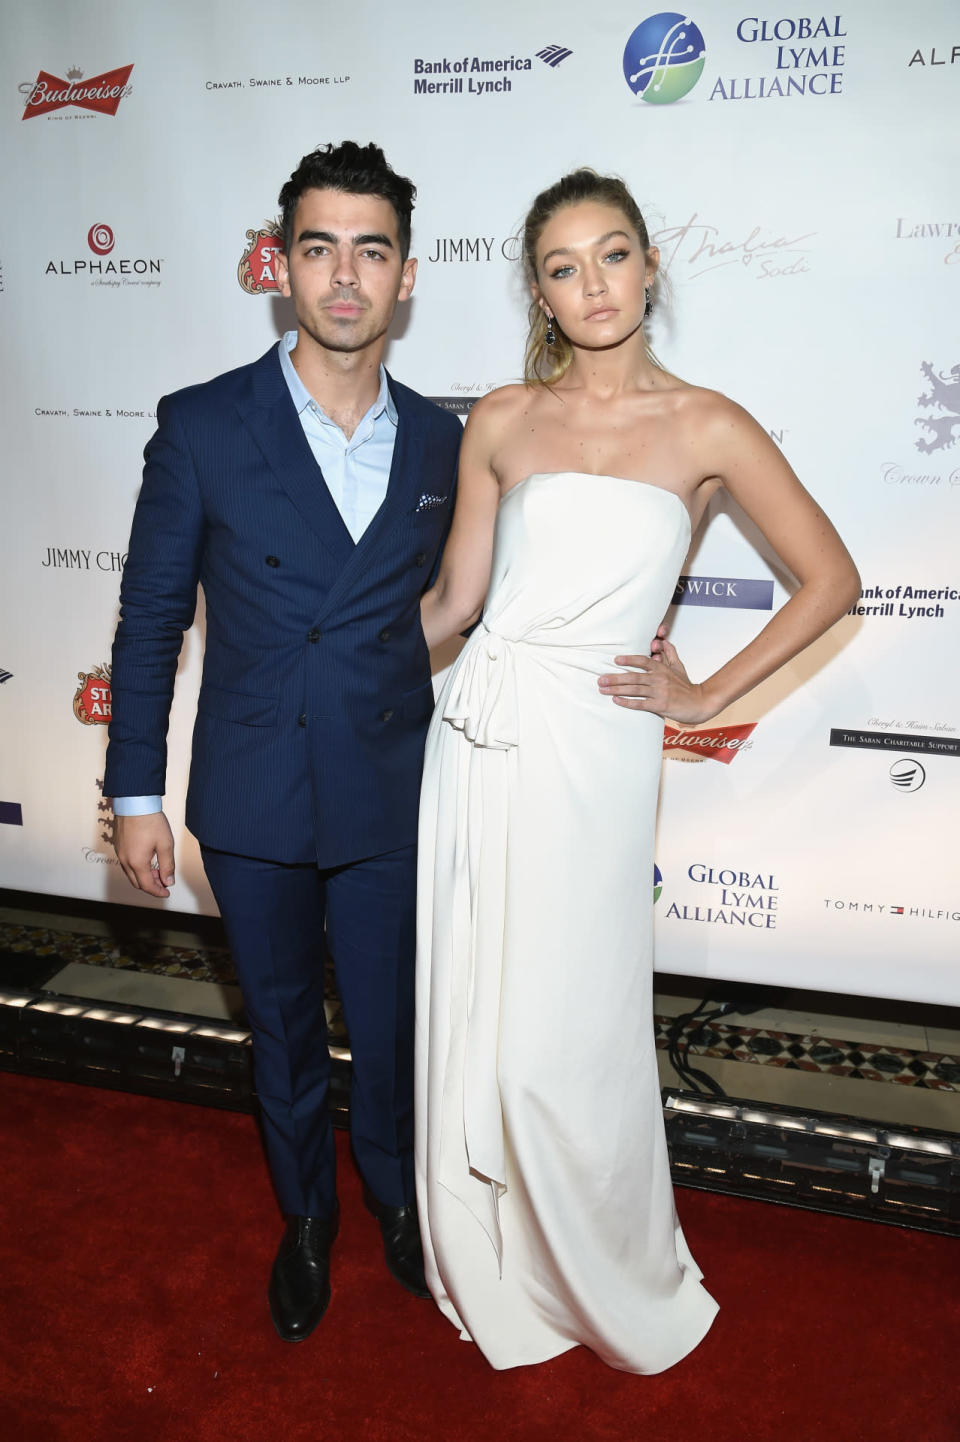 <p>While Joe Jonas and Gigi Hadid have been hot and heavy for a while now — they even has a cute celebrity couple nickname, GiJoe — the pair stepped out together on the red carpet for the first time on Thursday night. Jonas opened up about his girlfriend <a href="https://www.yahoo.com/style/gigi-hadid-to-body-shamers-if-you-dont-like-it-144842854.html" data-ylk="slk:confronting her body shamers on Instagram recently;outcm:mb_qualified_link;_E:mb_qualified_link;ct:story;" class="link  yahoo-link">confronting her body shamers on Instagram recently</a> (“Yes, I have boobs, I have abs, I have a butt, I have thighs, but I’m not asking for special treatment,” she wrote. “Your mean comments don’t make me want to change my body.”), saying he’s really proud of her. “I think it’s something that needs to be spoken about especially in that community. The industry seems to be changing for models, and it’s great that she can have a voice." </p>